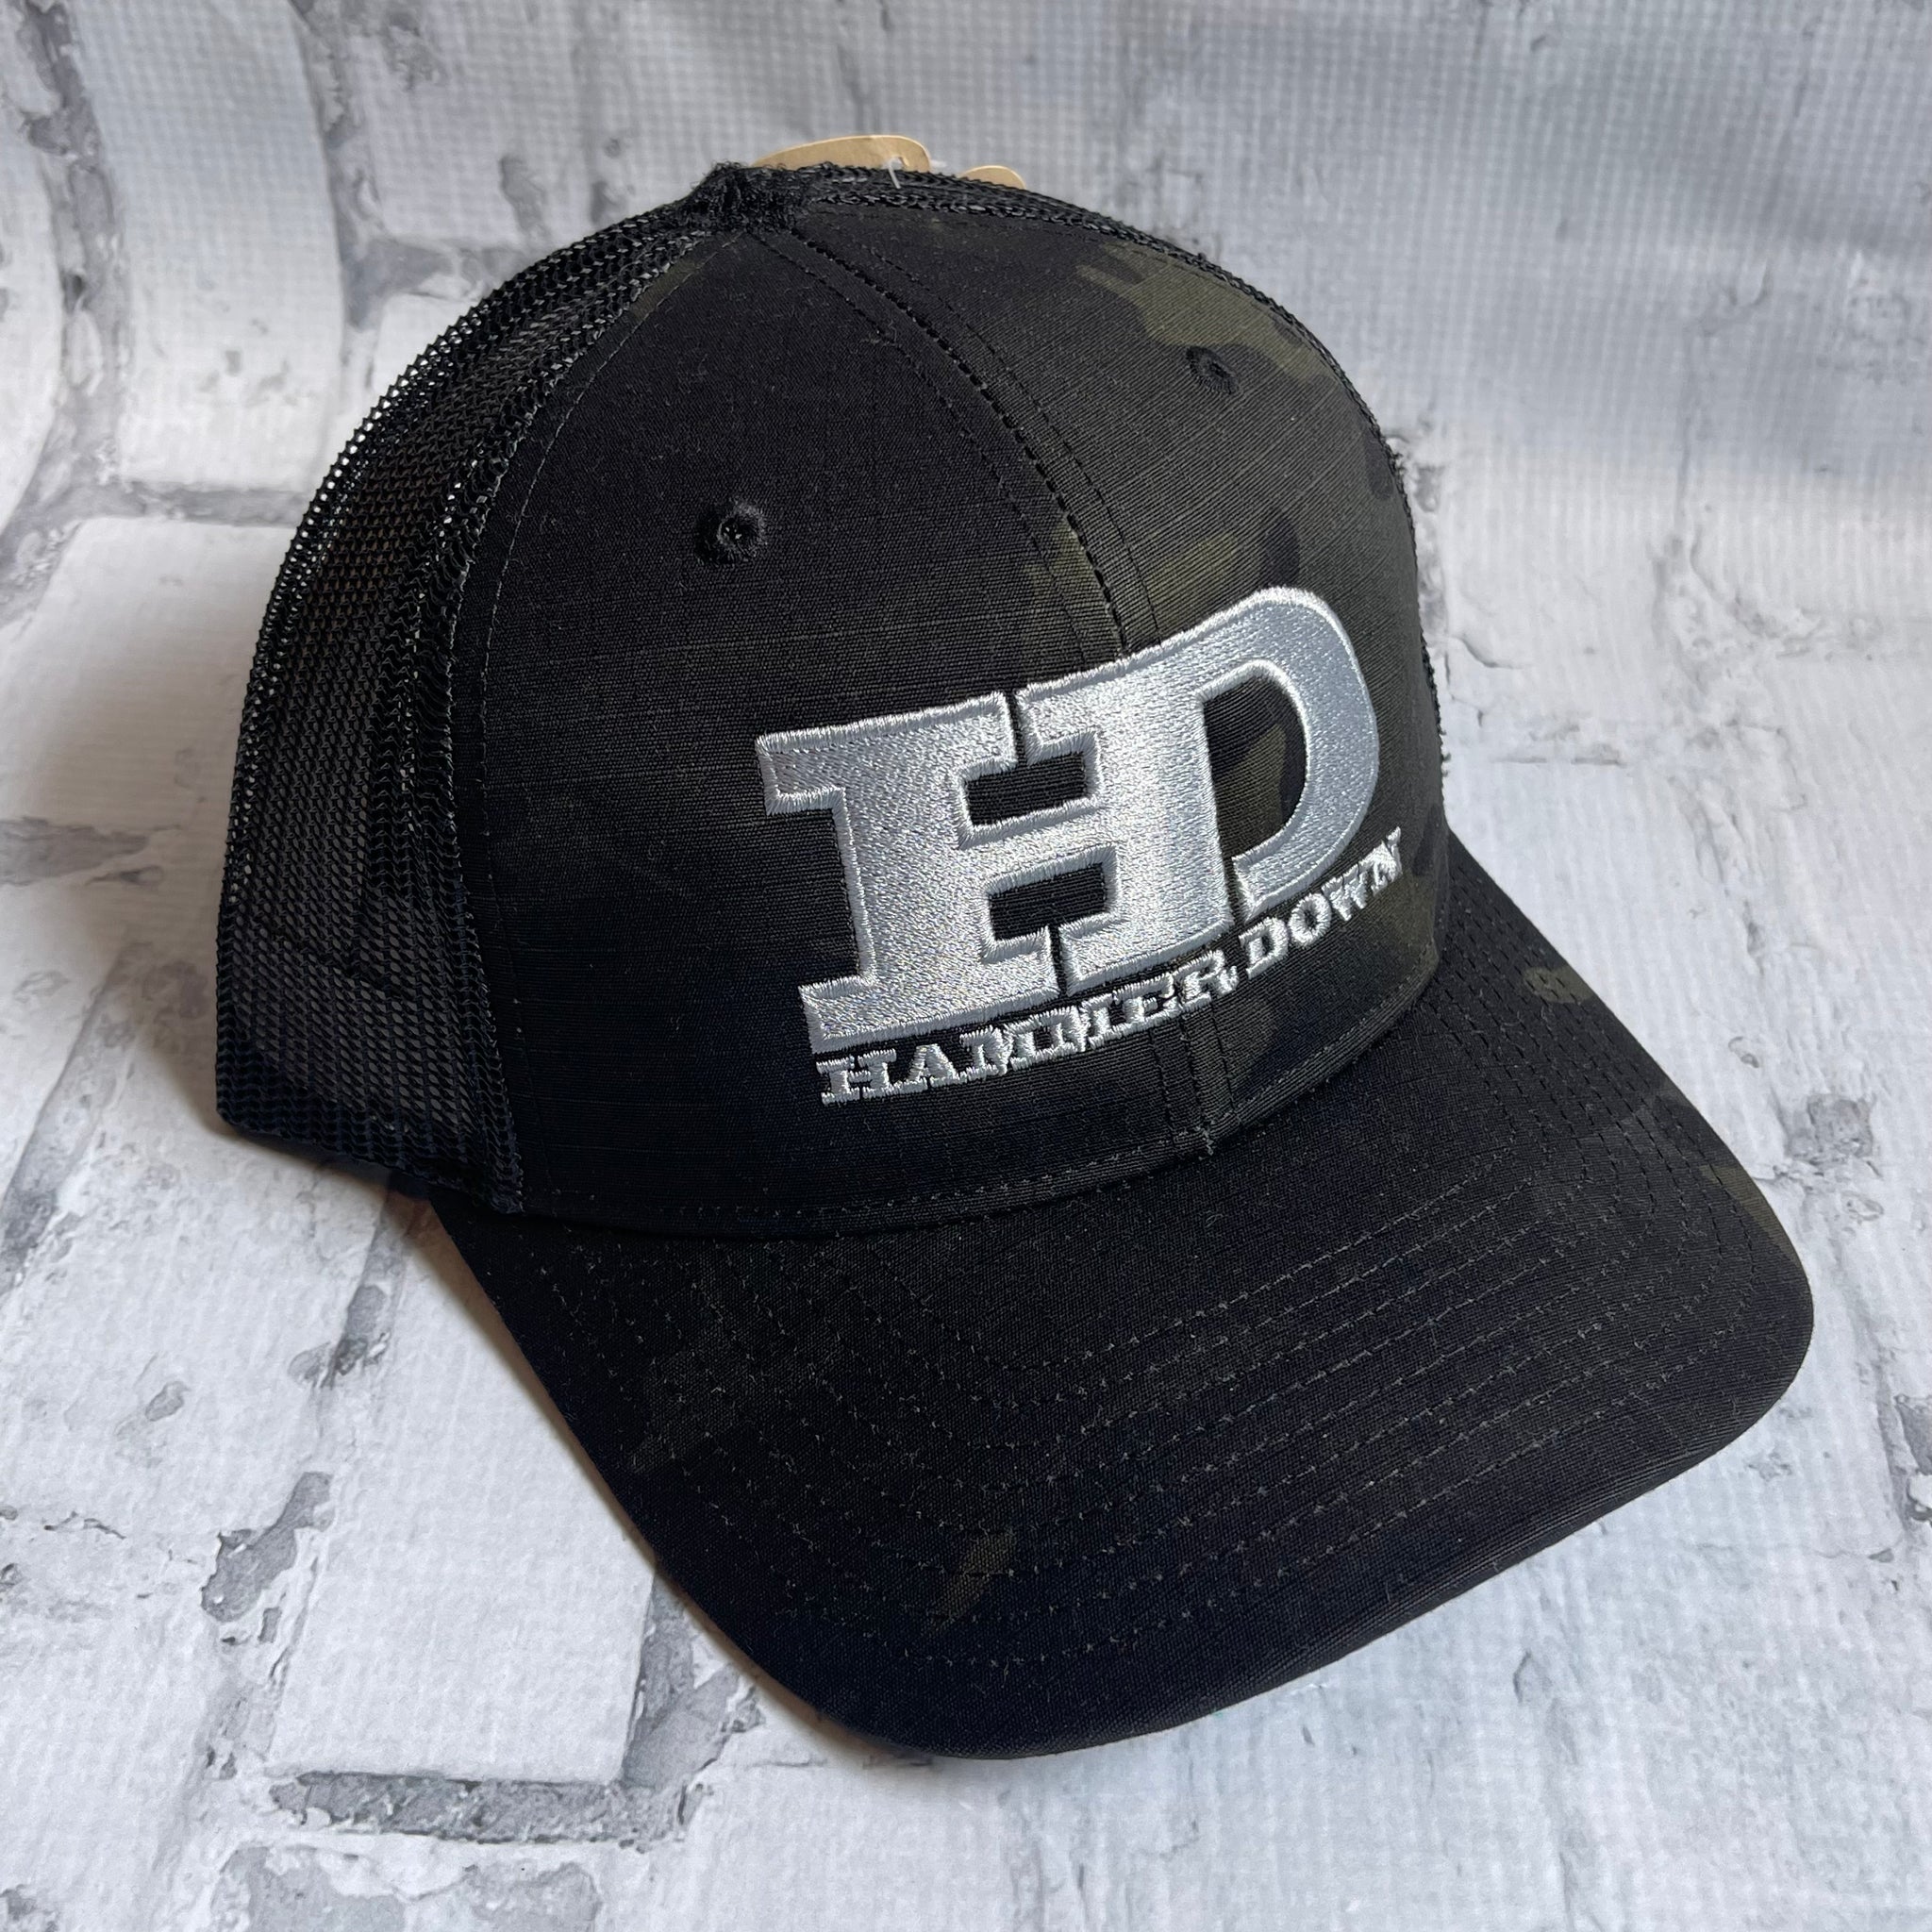 Hammer Down "HD Original" Hat - Black with Woven Patch - Southern Charm "Shop The Charm"